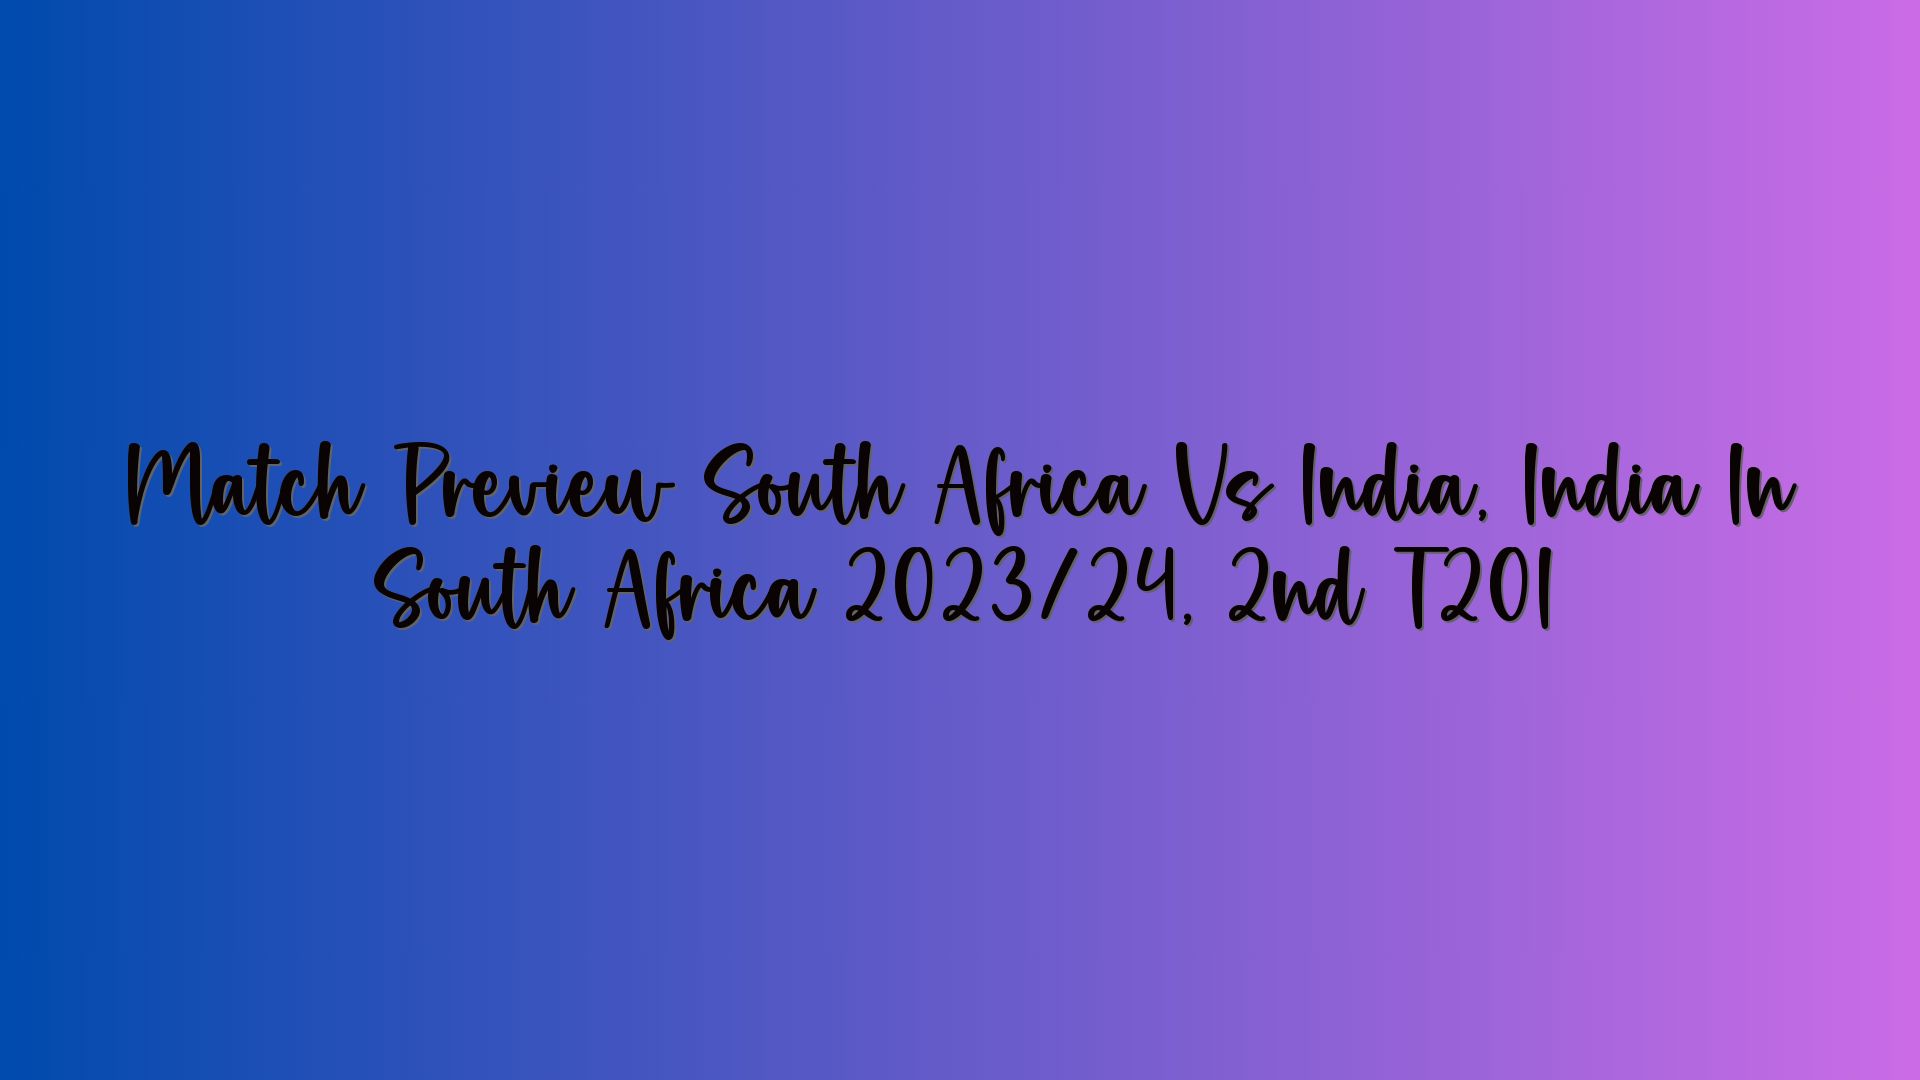 Match Preview South Africa Vs India, India In South Africa 2023/24, 2nd T20I